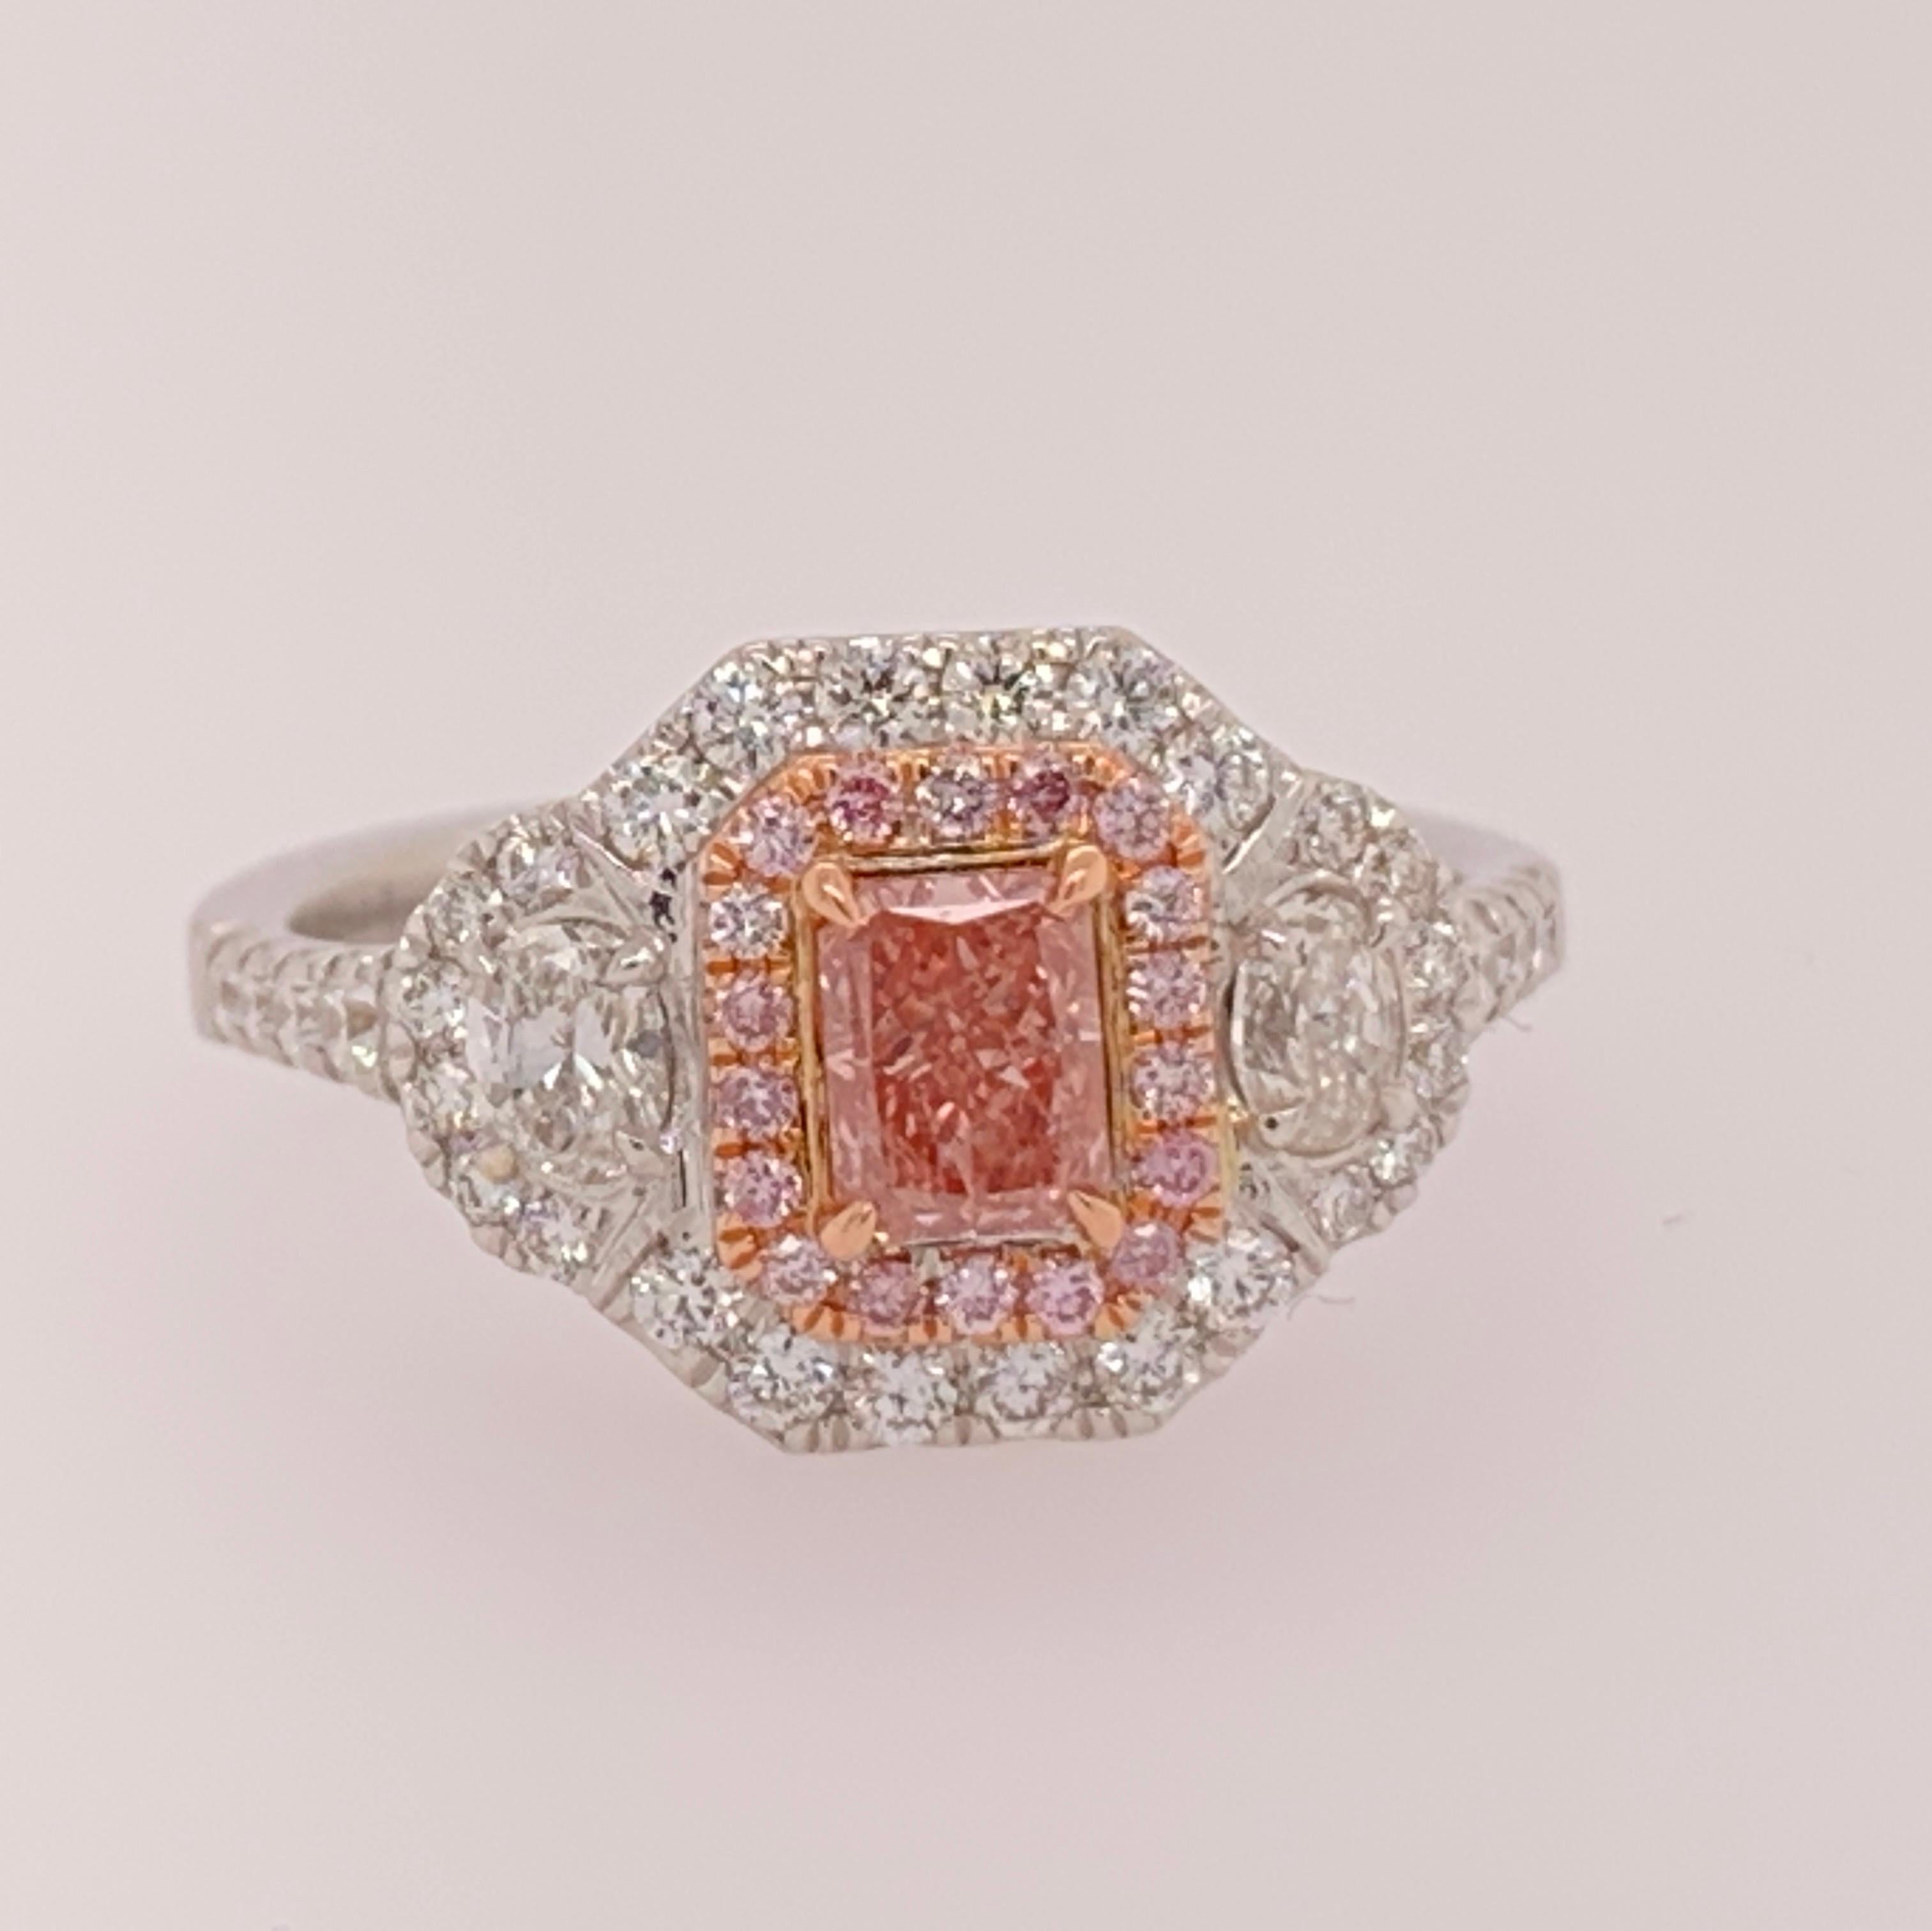 18k white gold Ladies Ring, SIZE 6.5.

Centerstone is a natural 0.40ct fancy orangy PINK rectangular radiant cut, GIA certified SI1 clarity. The surrounding Natural Round Brilliant pink diamonds (18) weigh 0.10 carats.

The ring contains 55